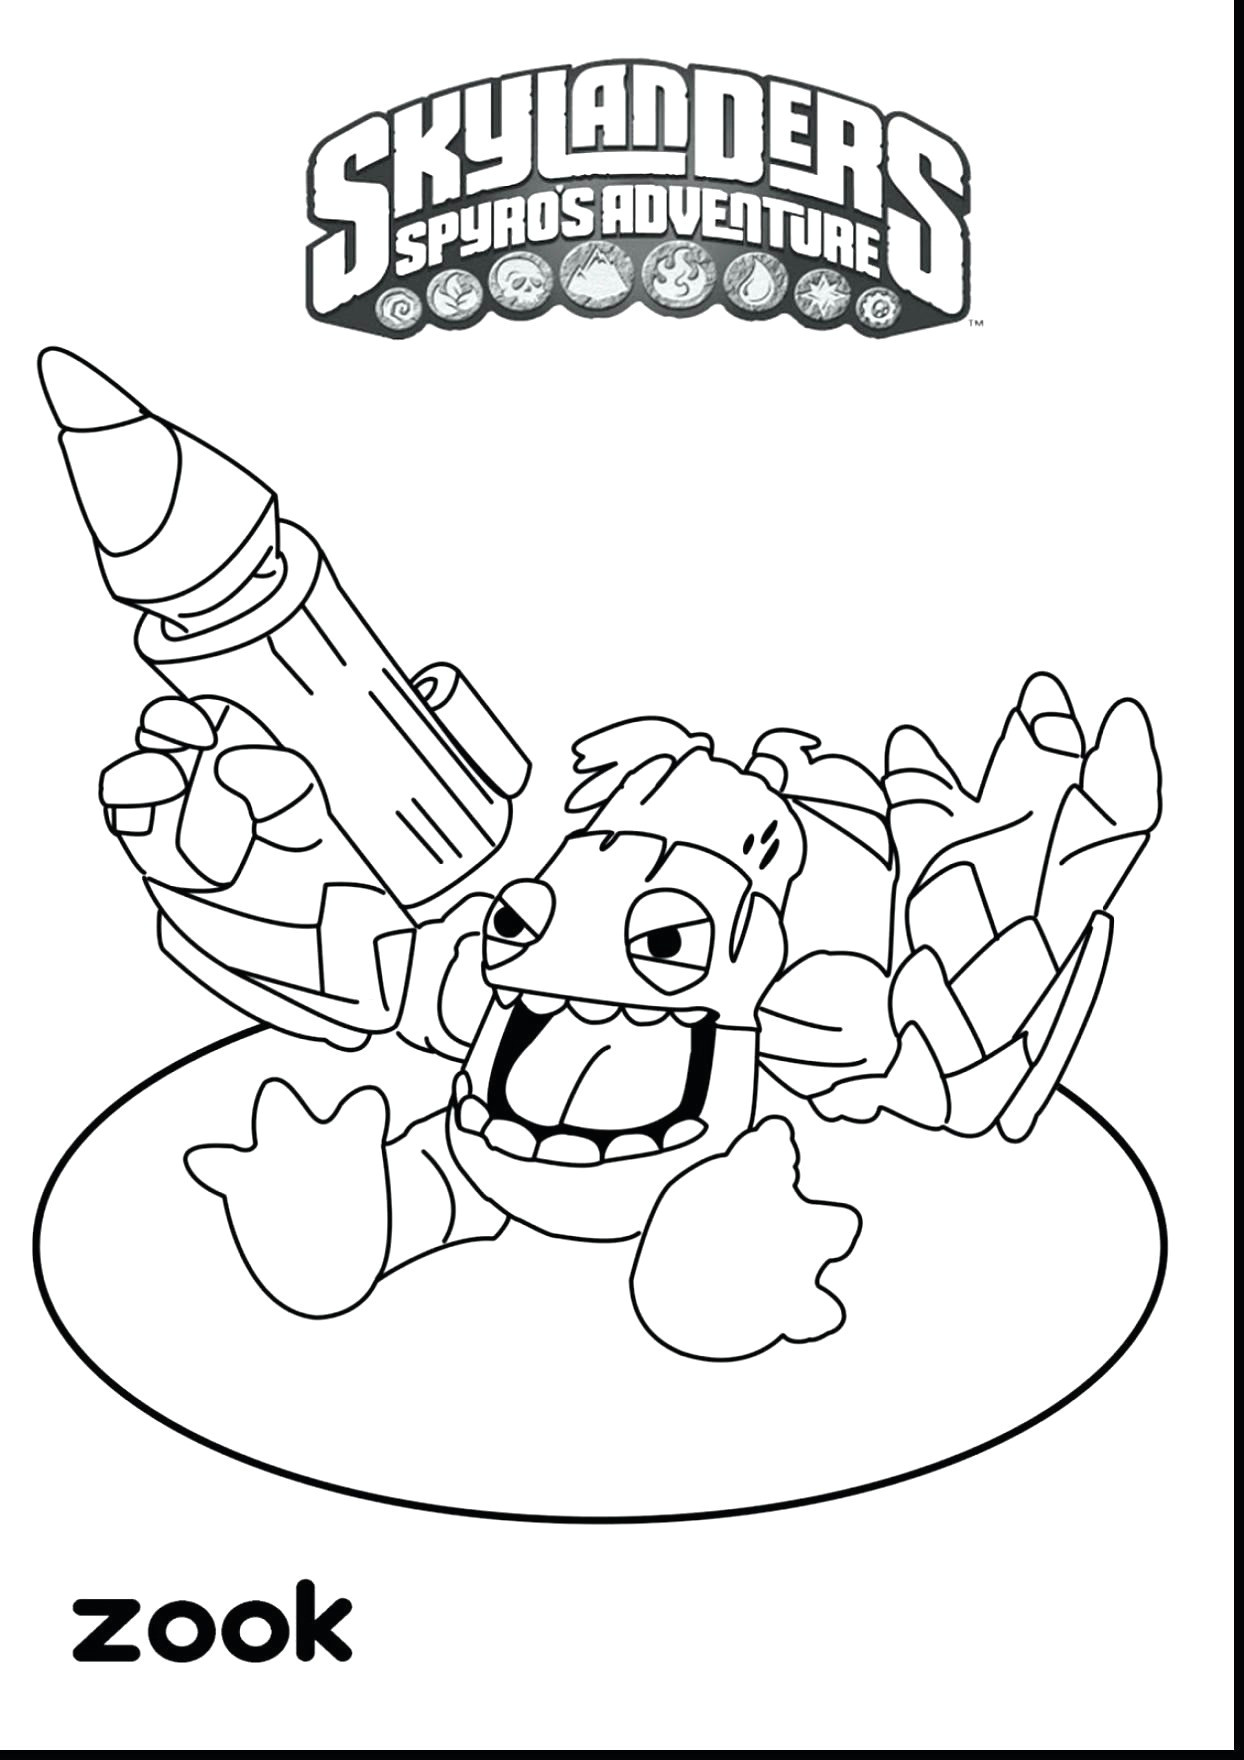 Easy Drawings and Colouring Www Colouring Pages Brilliant Easy to Draw Instruments Home Coloring